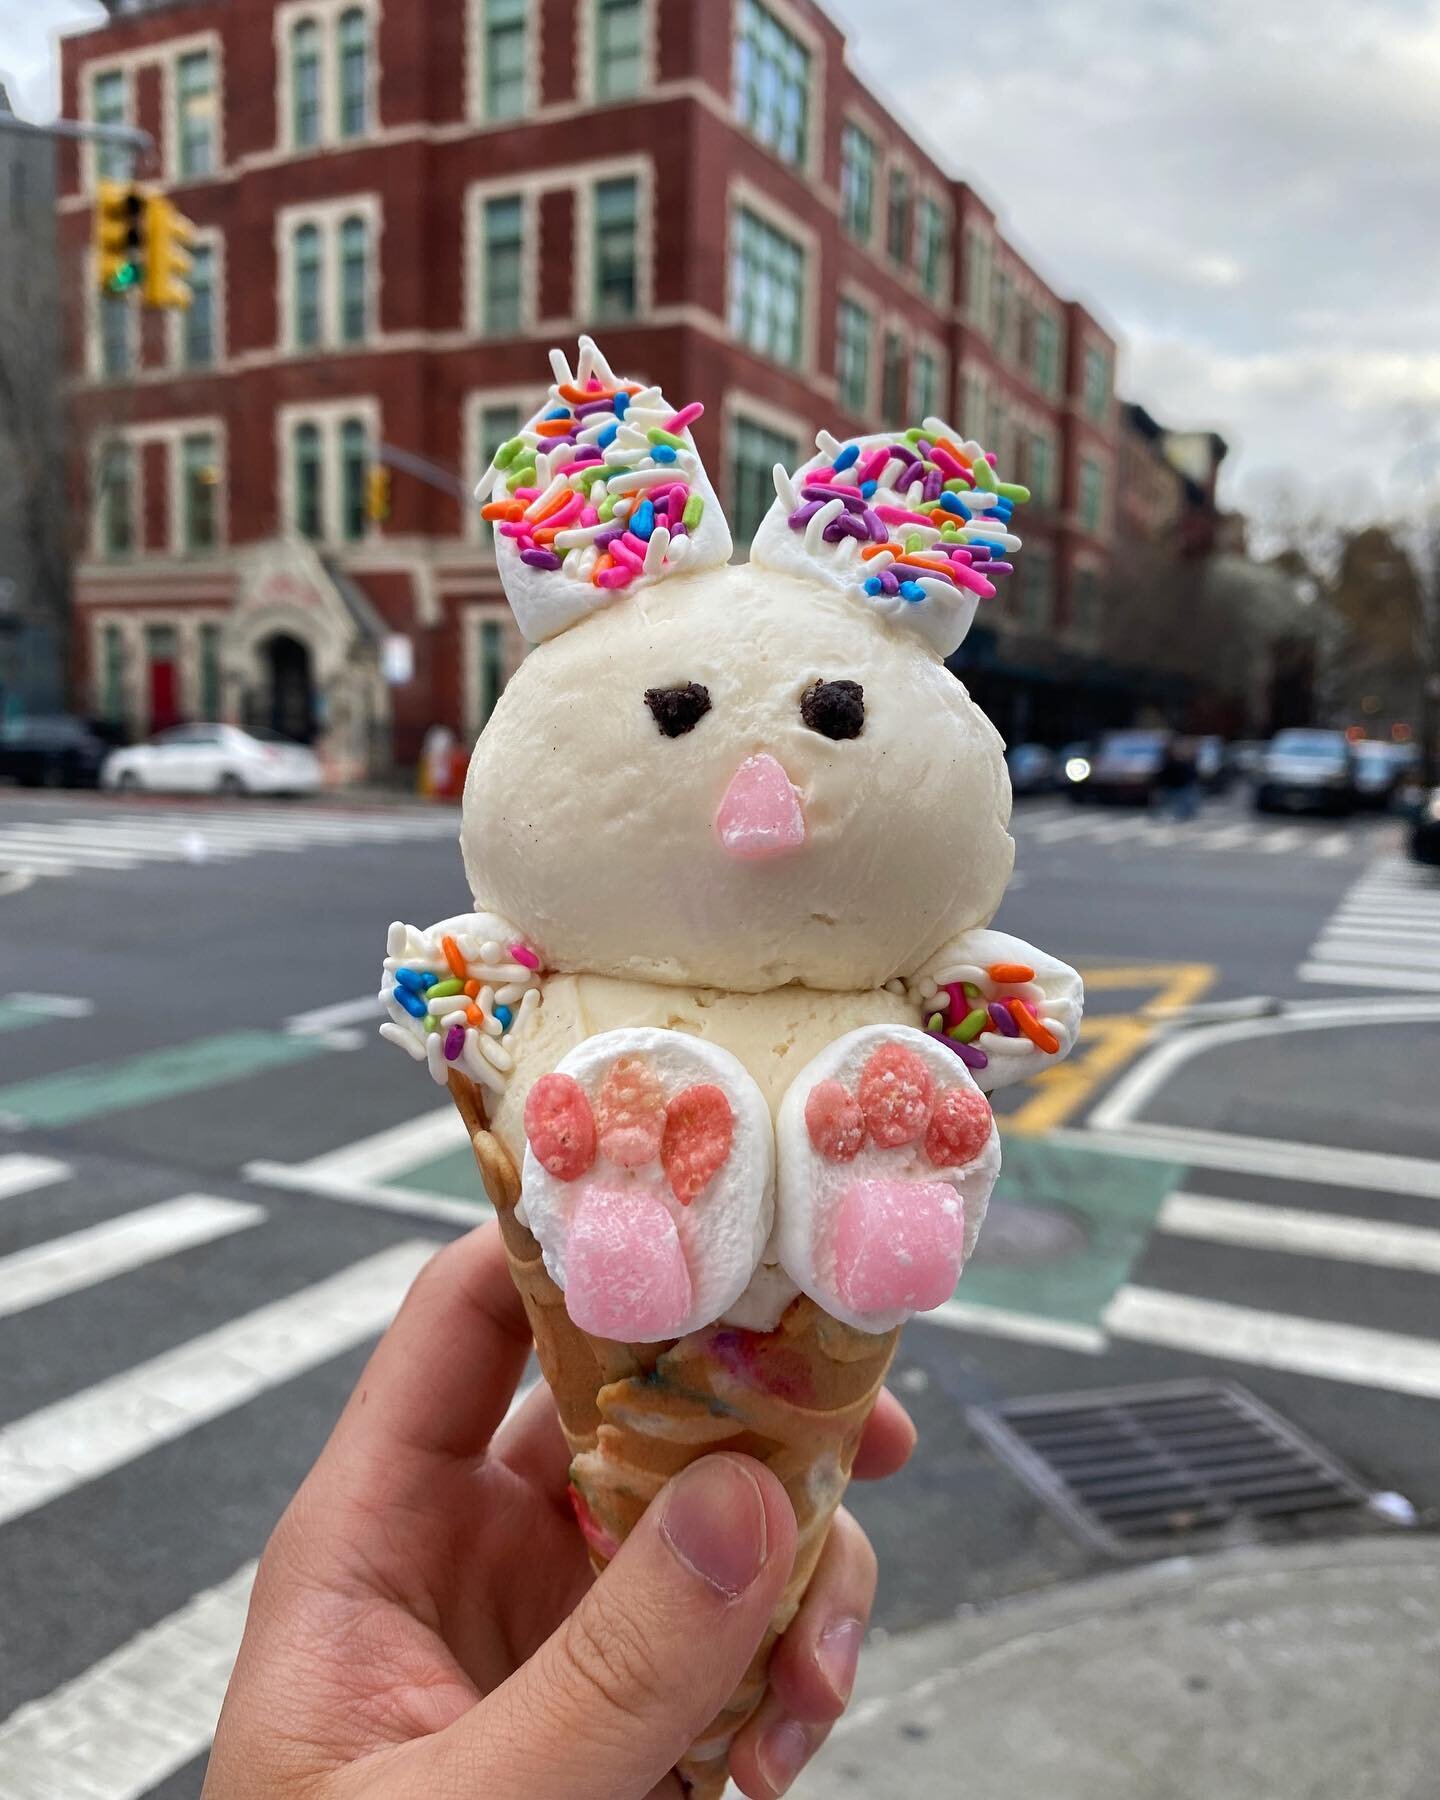 Look who just hopped into East Village for the whole month of April! 🐰🐰
.
.
.

#stuffedicecream #Stuffed #icecream #nyc #nycvibes #dessert #icecreambouquet #stuffedbouquet #bouquet #heresmyfood #yougottaeatthis #buzzfeedfood #treatyoself #eatfamous